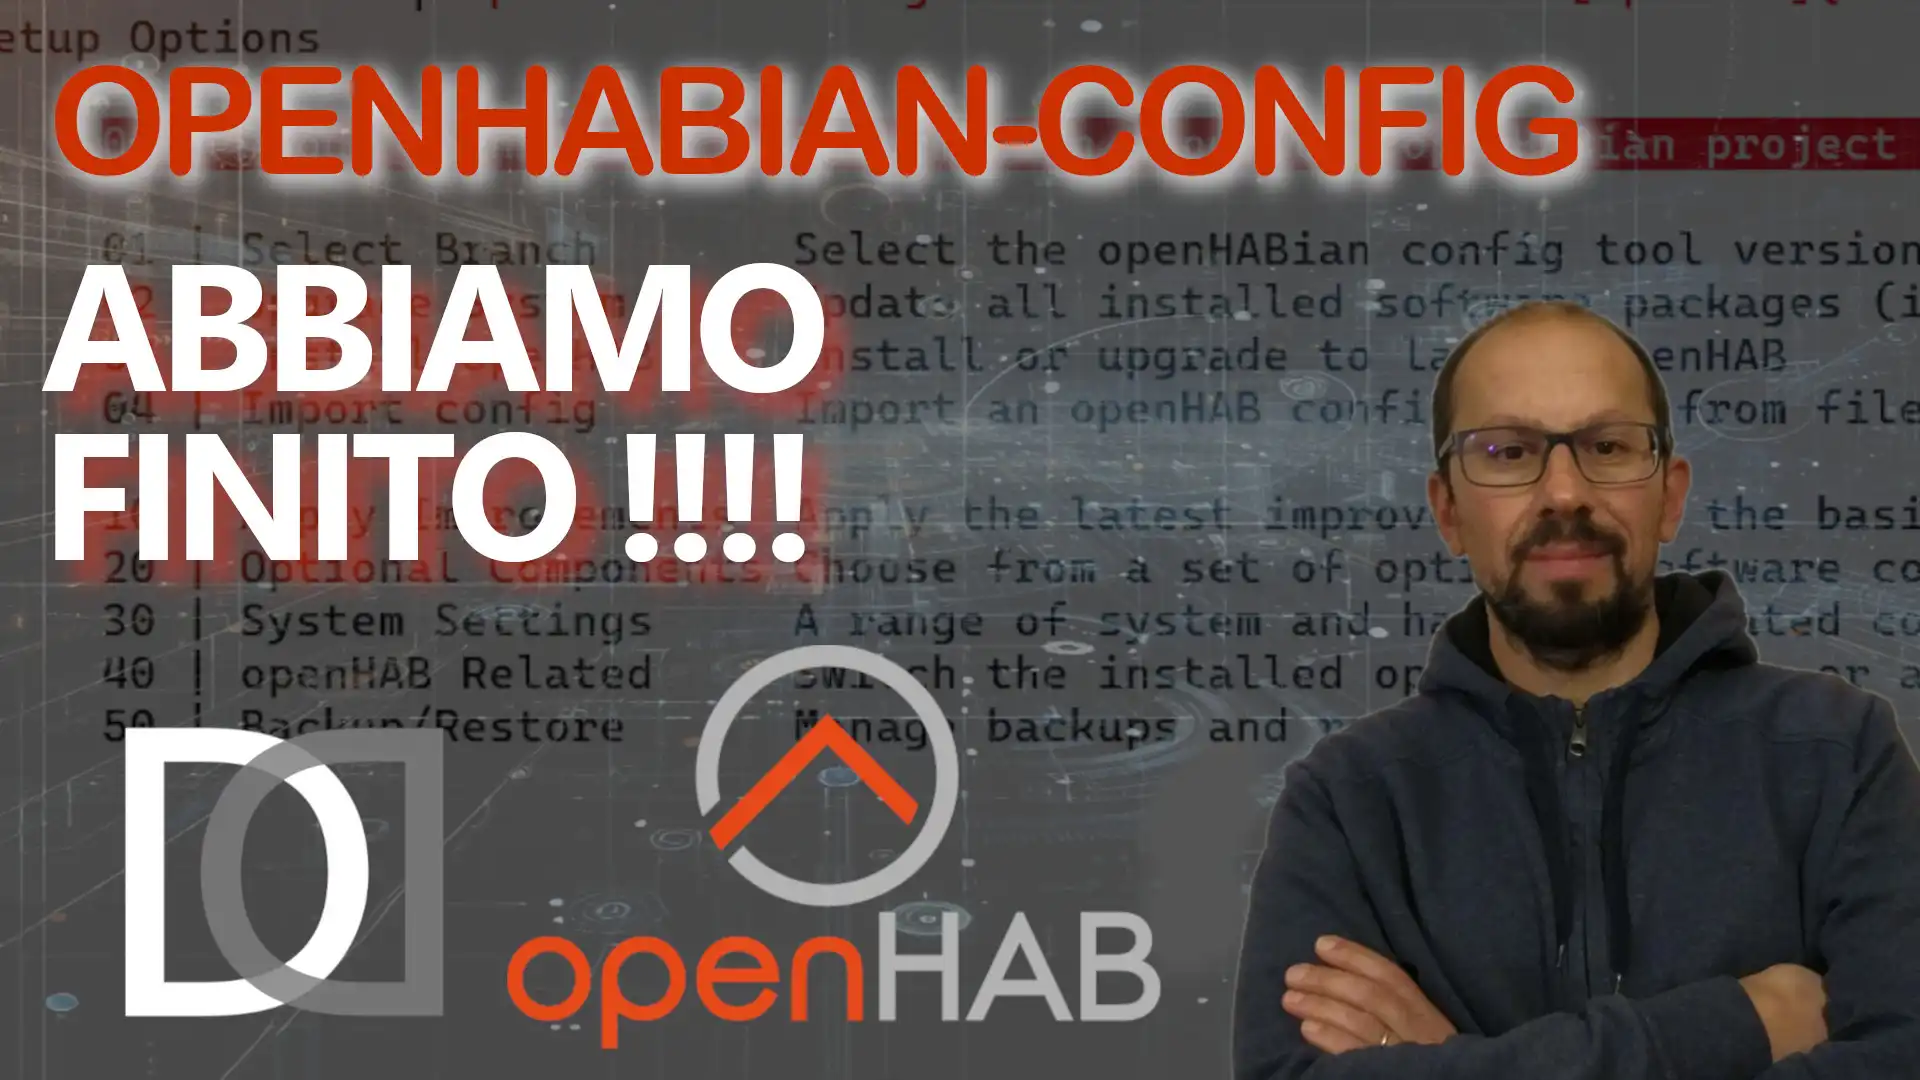 OPENHAB in a NUTSHELL: 8. OpenHABian - Initial configuration completed - VIDEO